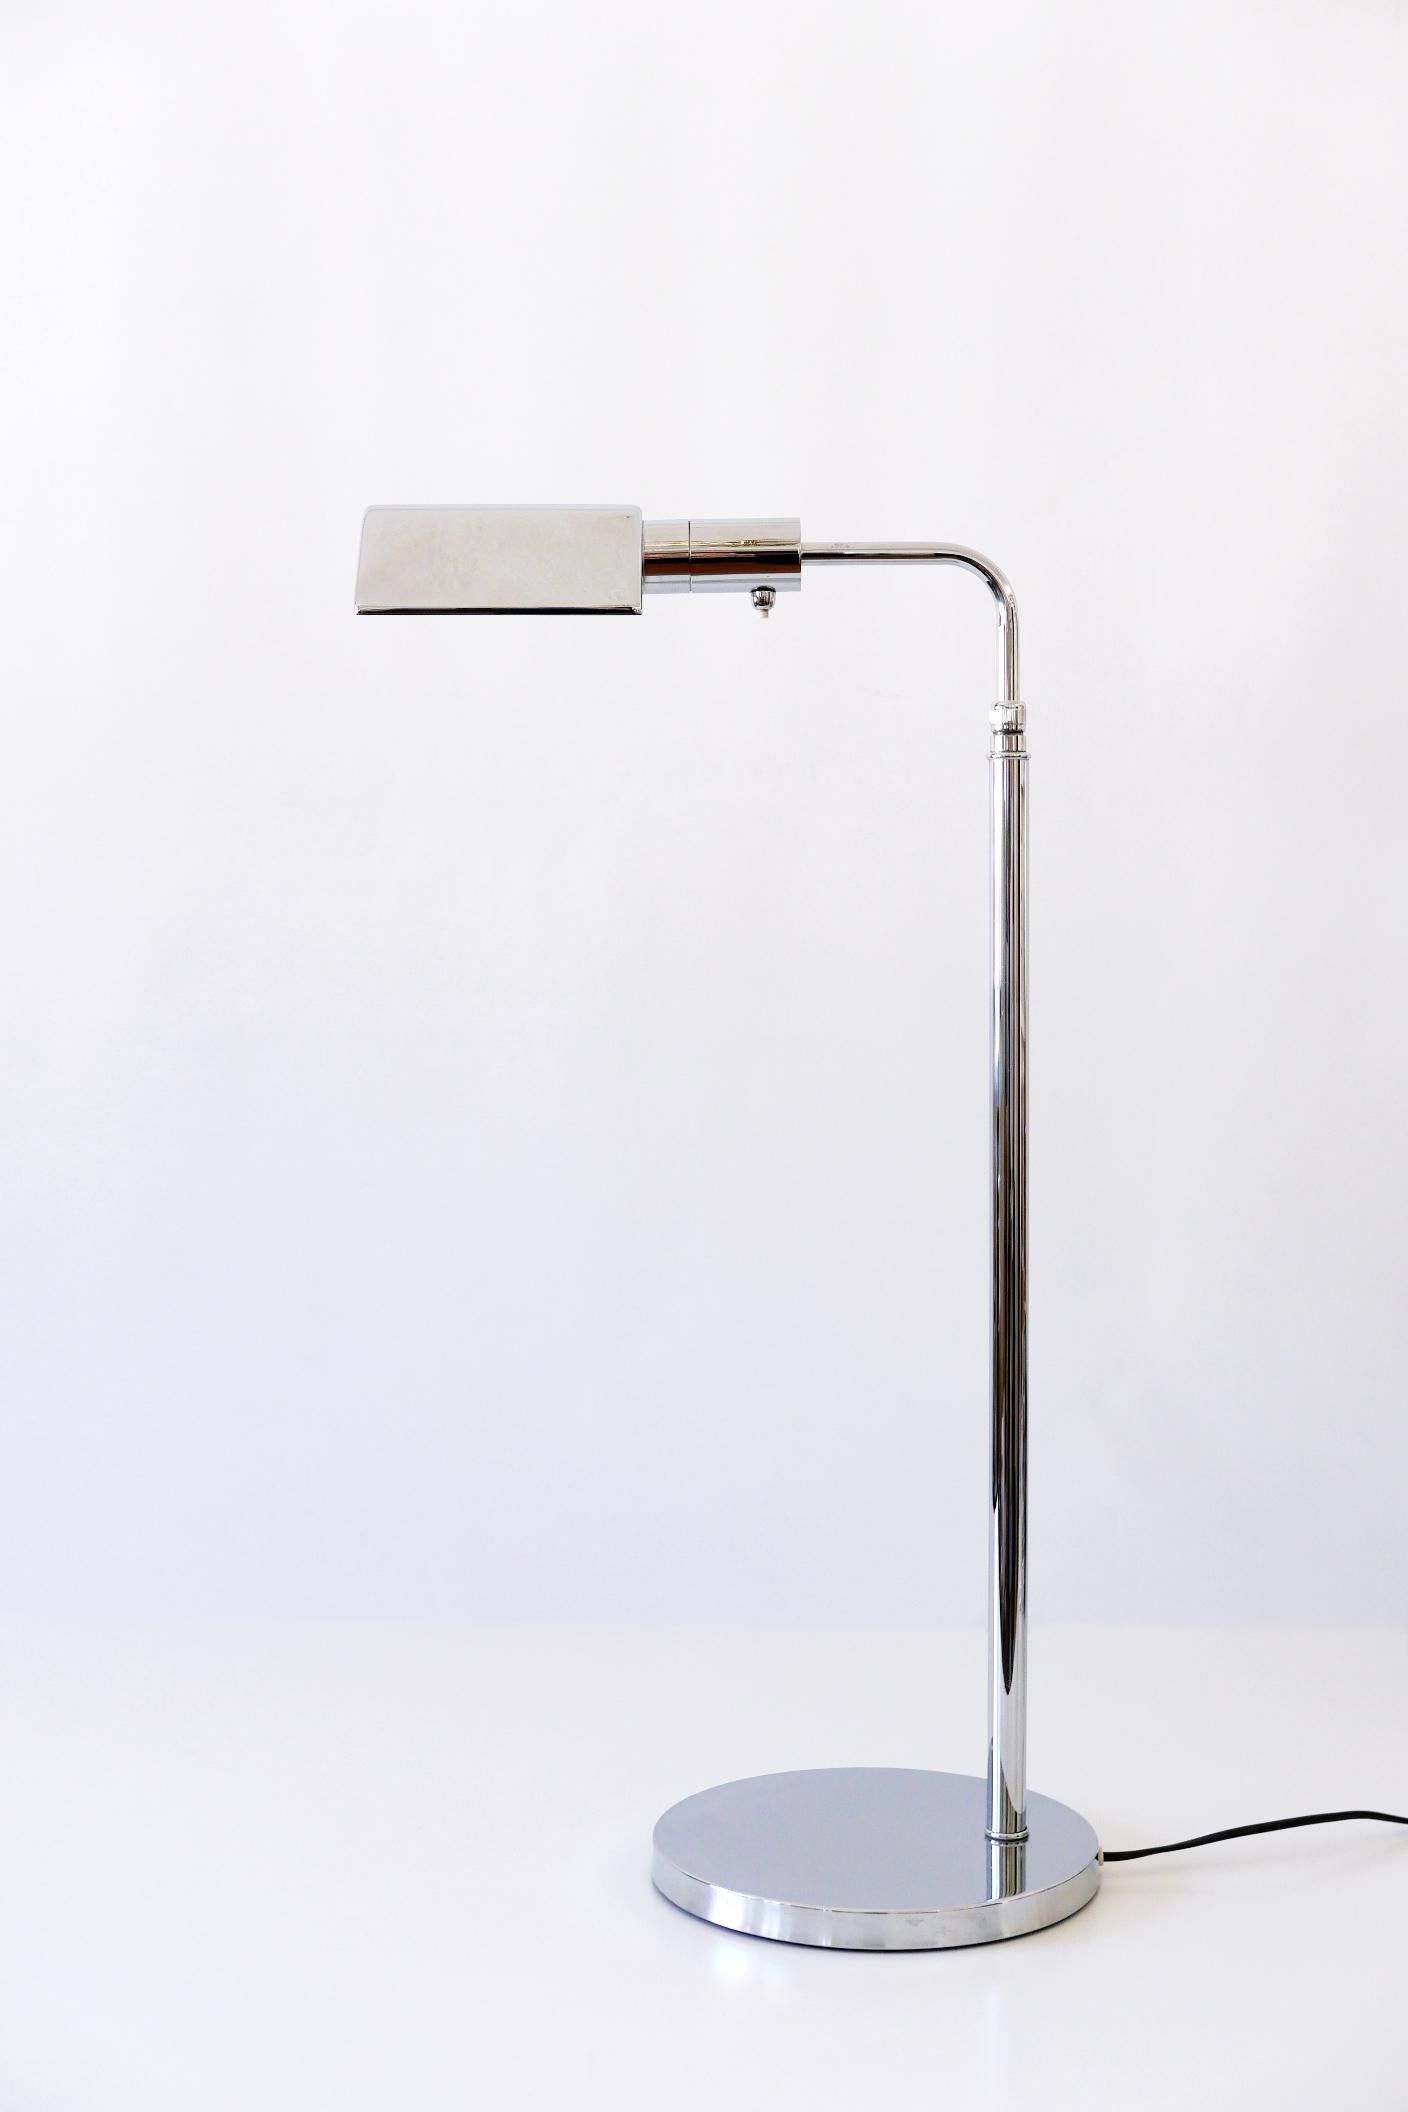 Elegant Mid-Century Modern floor lamp or reading light with adjustable height and pivoting arm and shade. Designed and manufactured in 1970s, Germany.

Executed in chrome-plated brass, the lamp needs 1 x E27 Edison screw fit bulb, is wired, and in